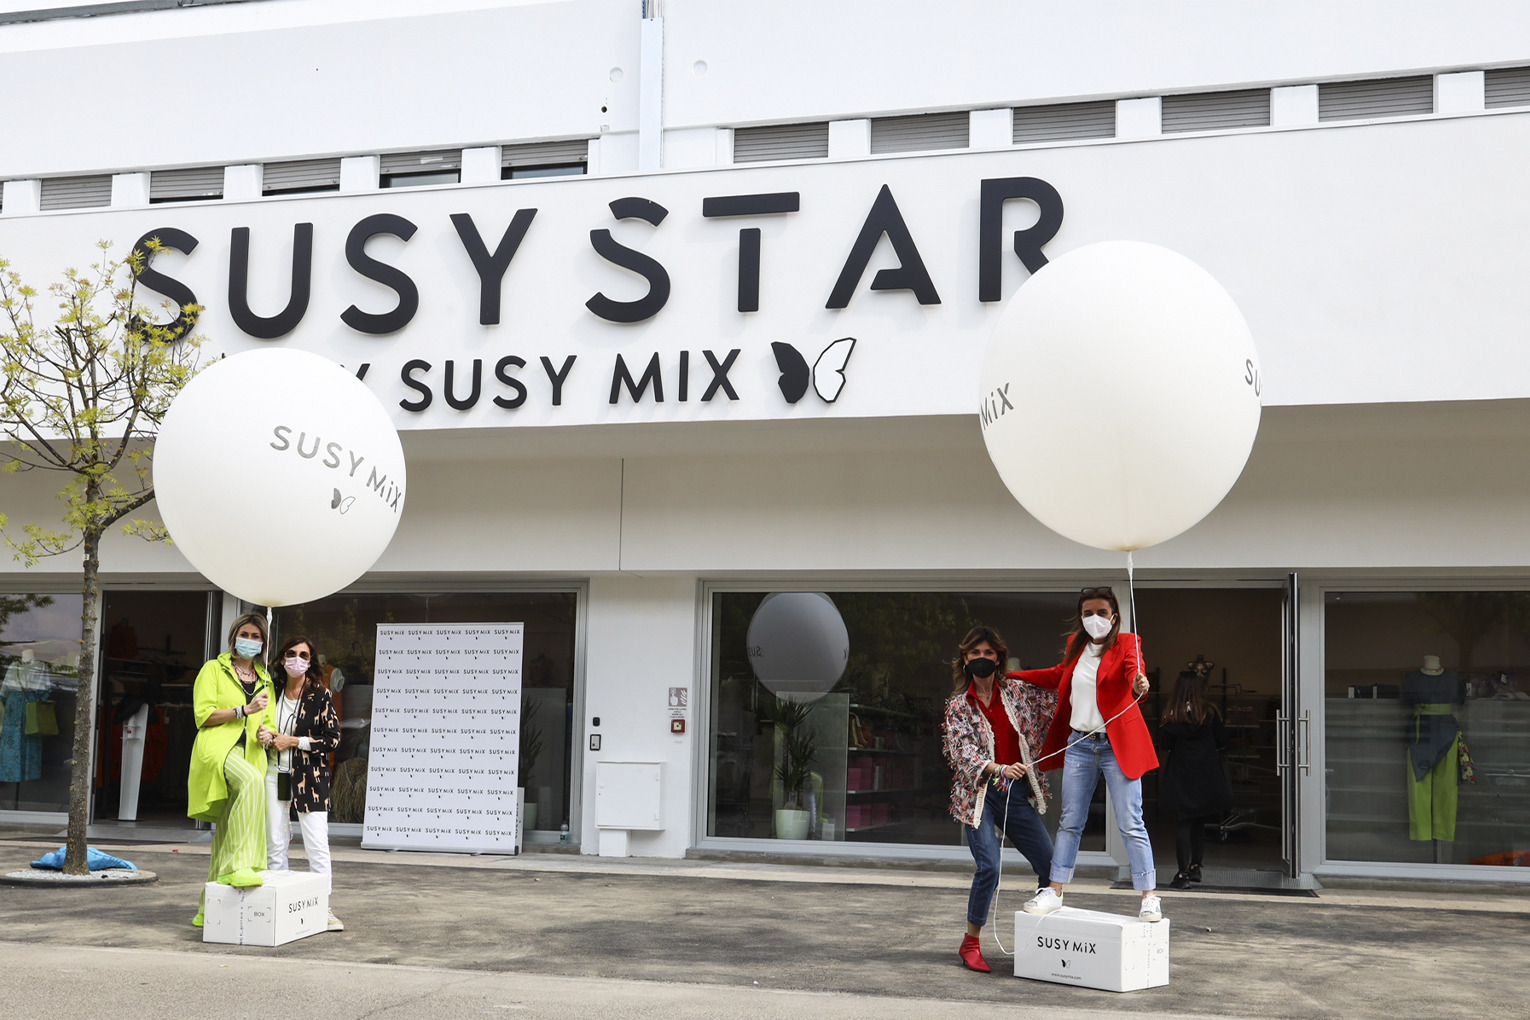 SUSY STAR: NEW OPENING